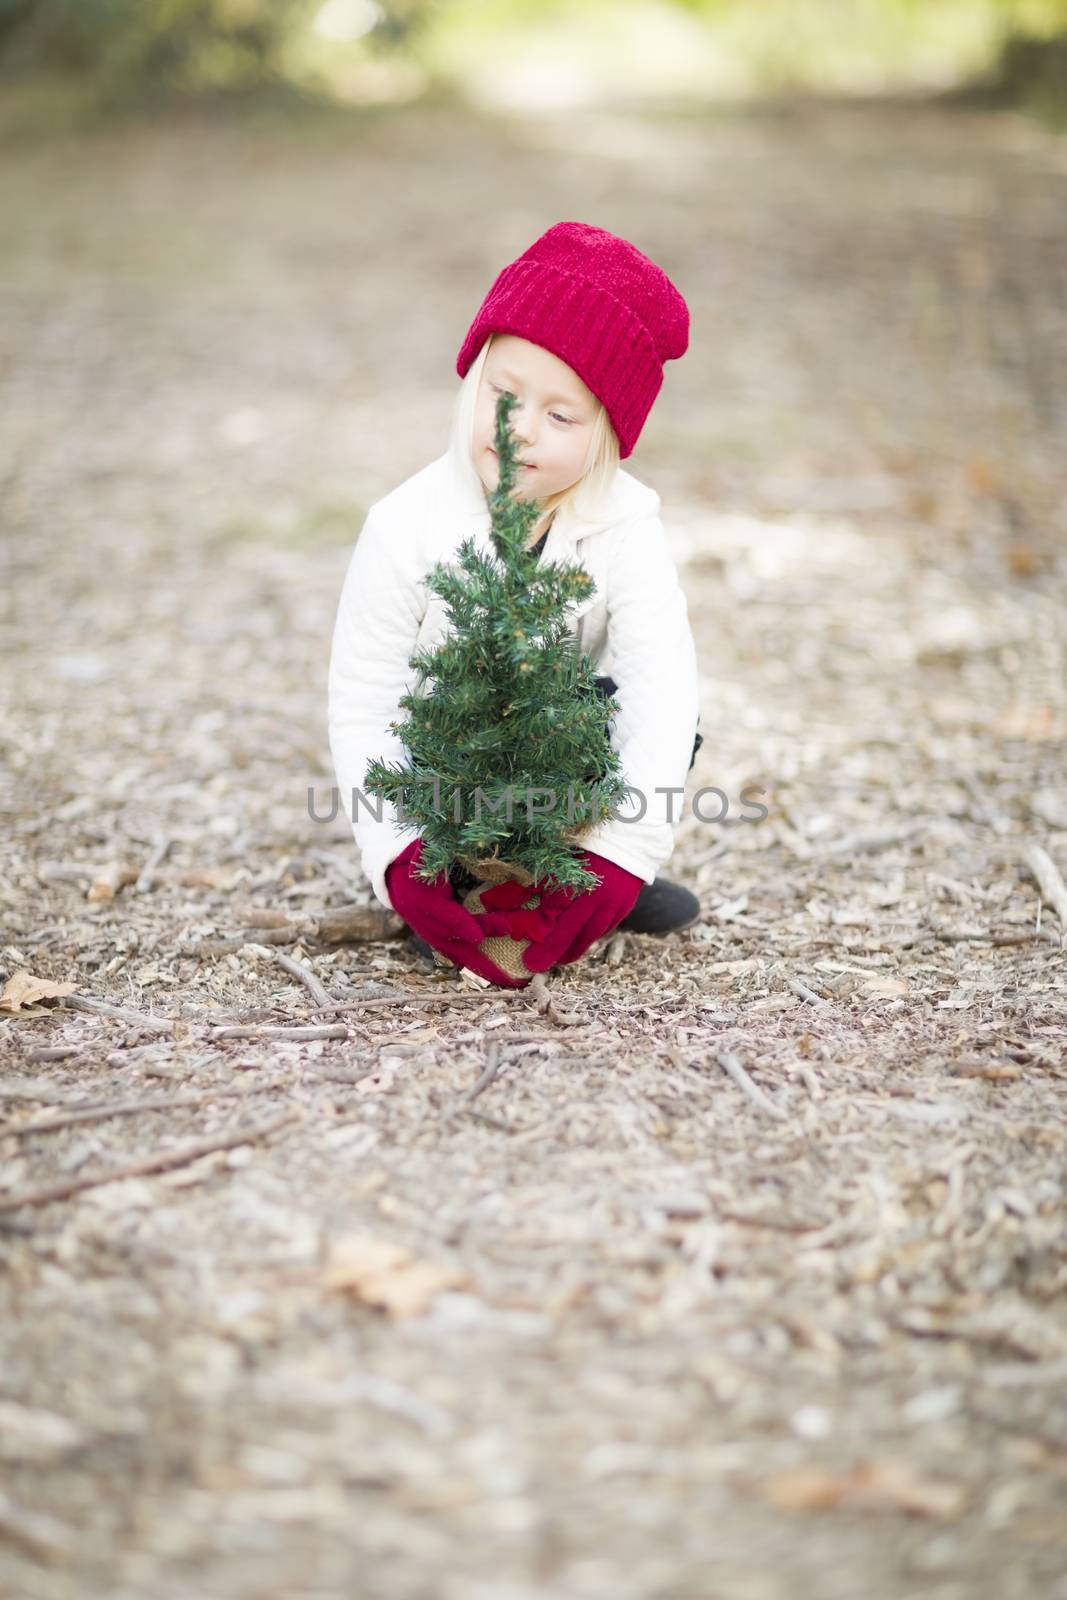 Girl In Red Mittens and Cap Near Small Christmas Tree by Feverpitched